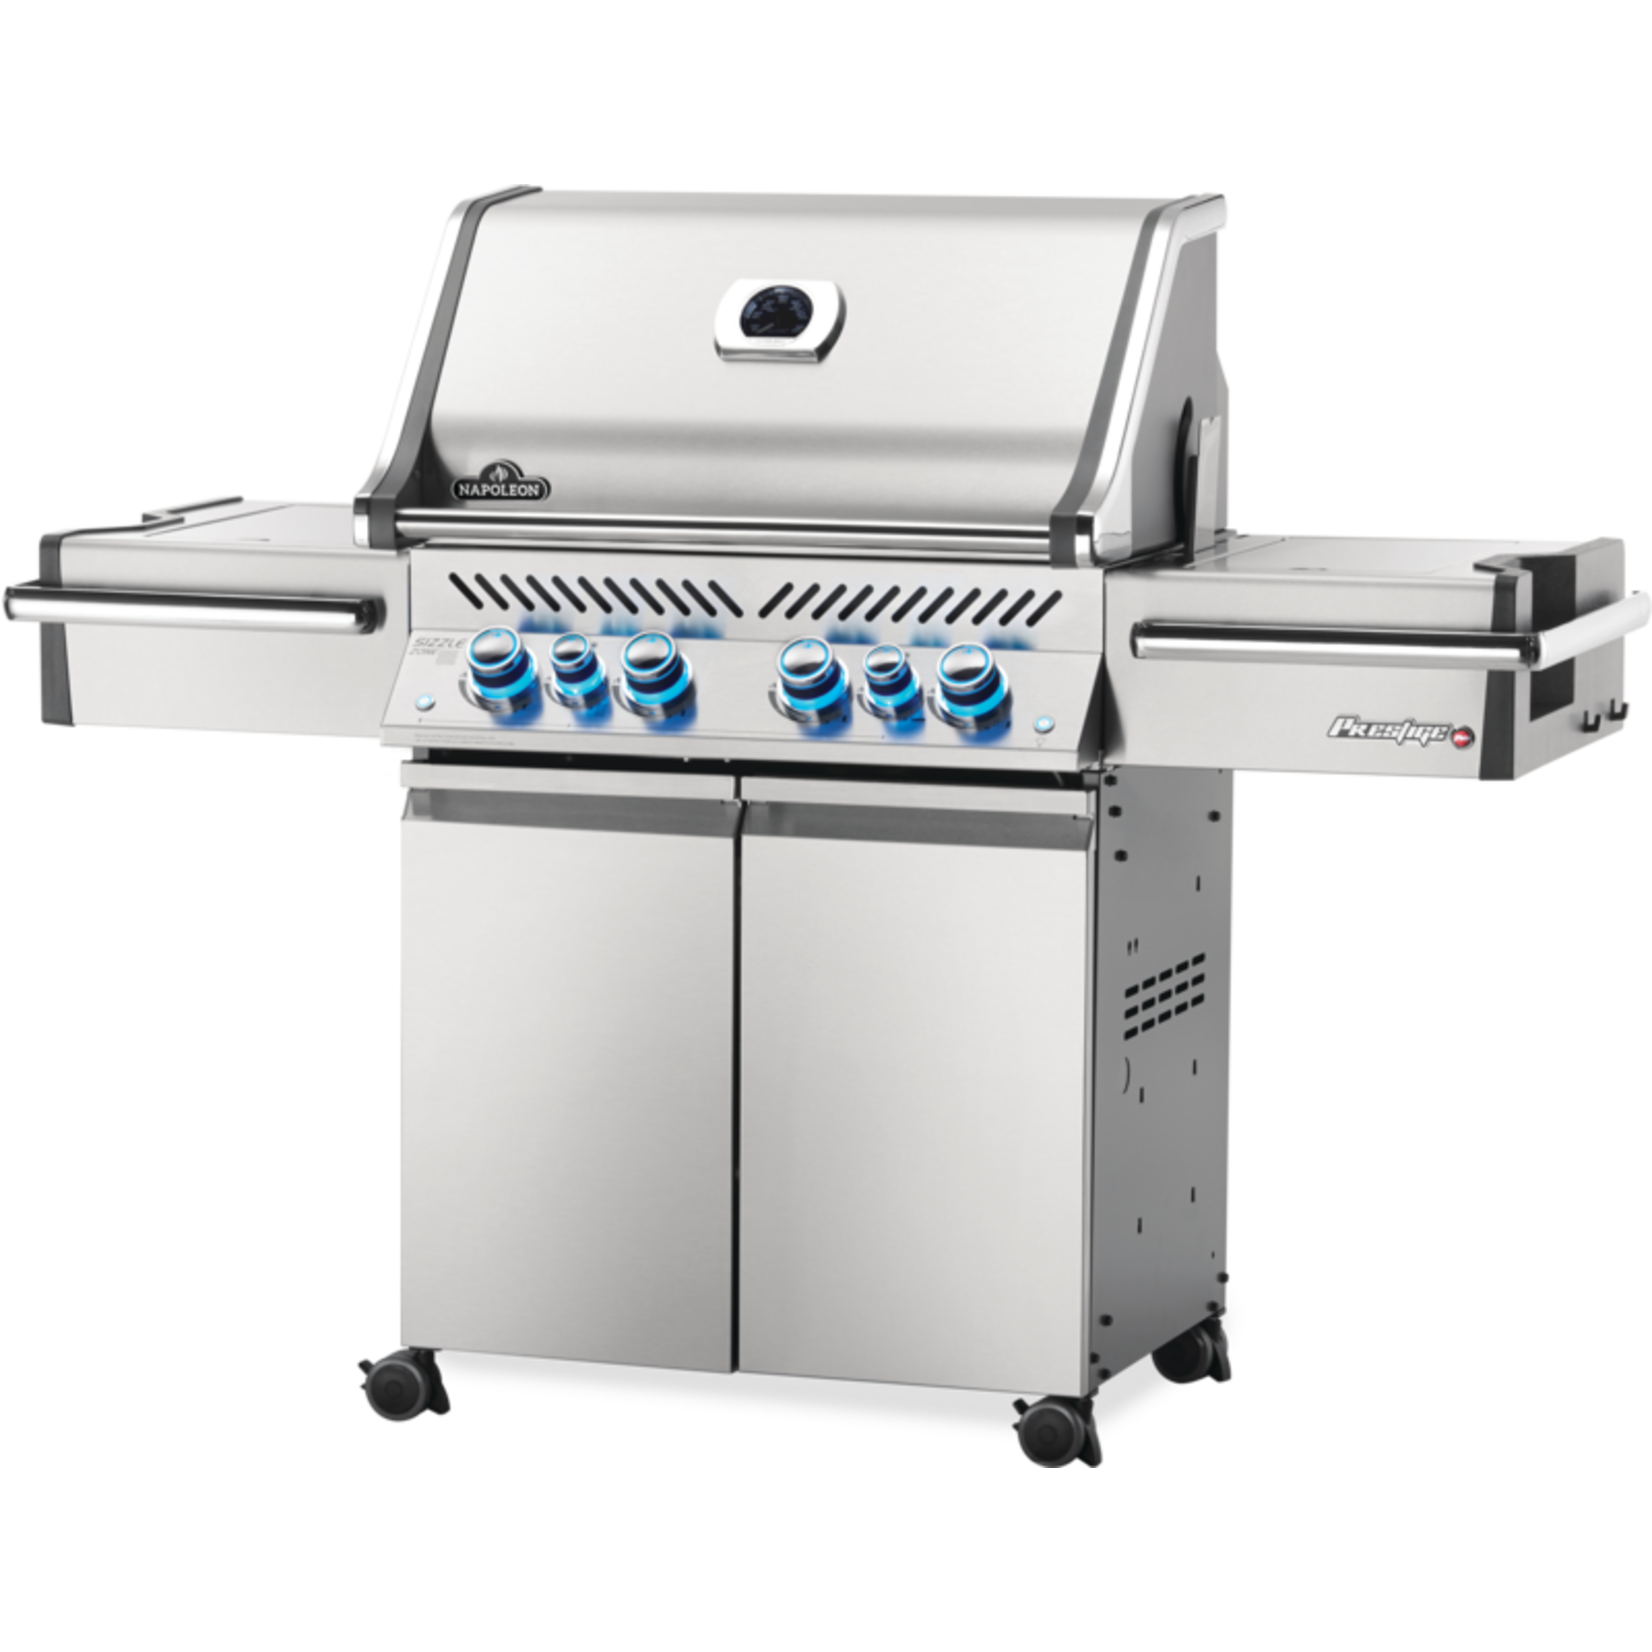 Napoleon Prestige PRO™ 500 Natural Gas Grill with Infrared Rear and Side Burners, Stainless Steel